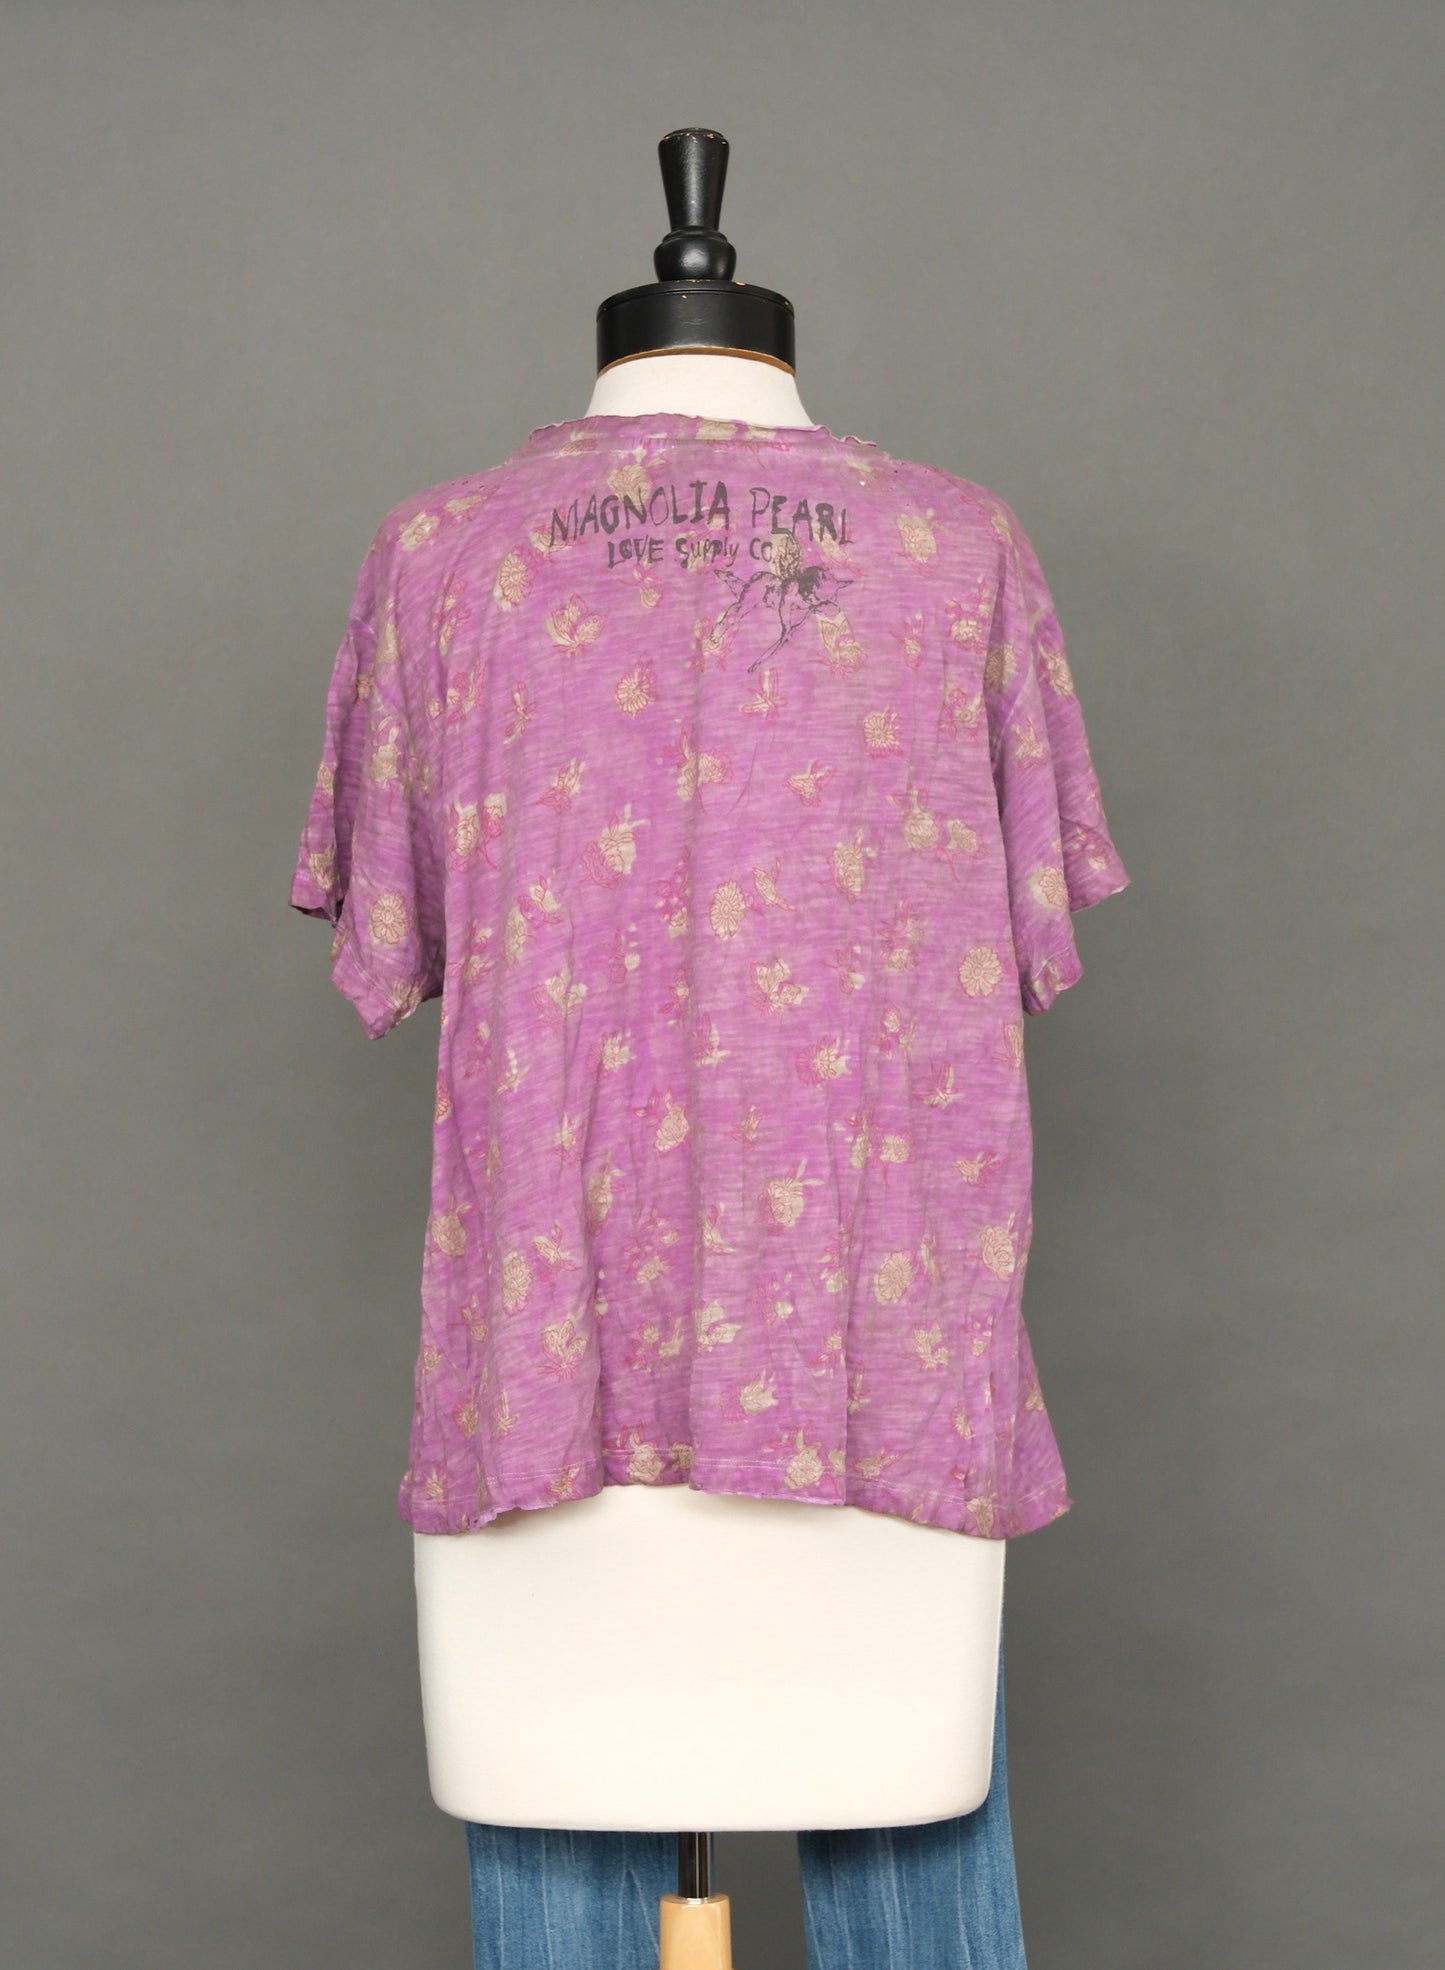 Nectar Floral T by Magnolia Pearl